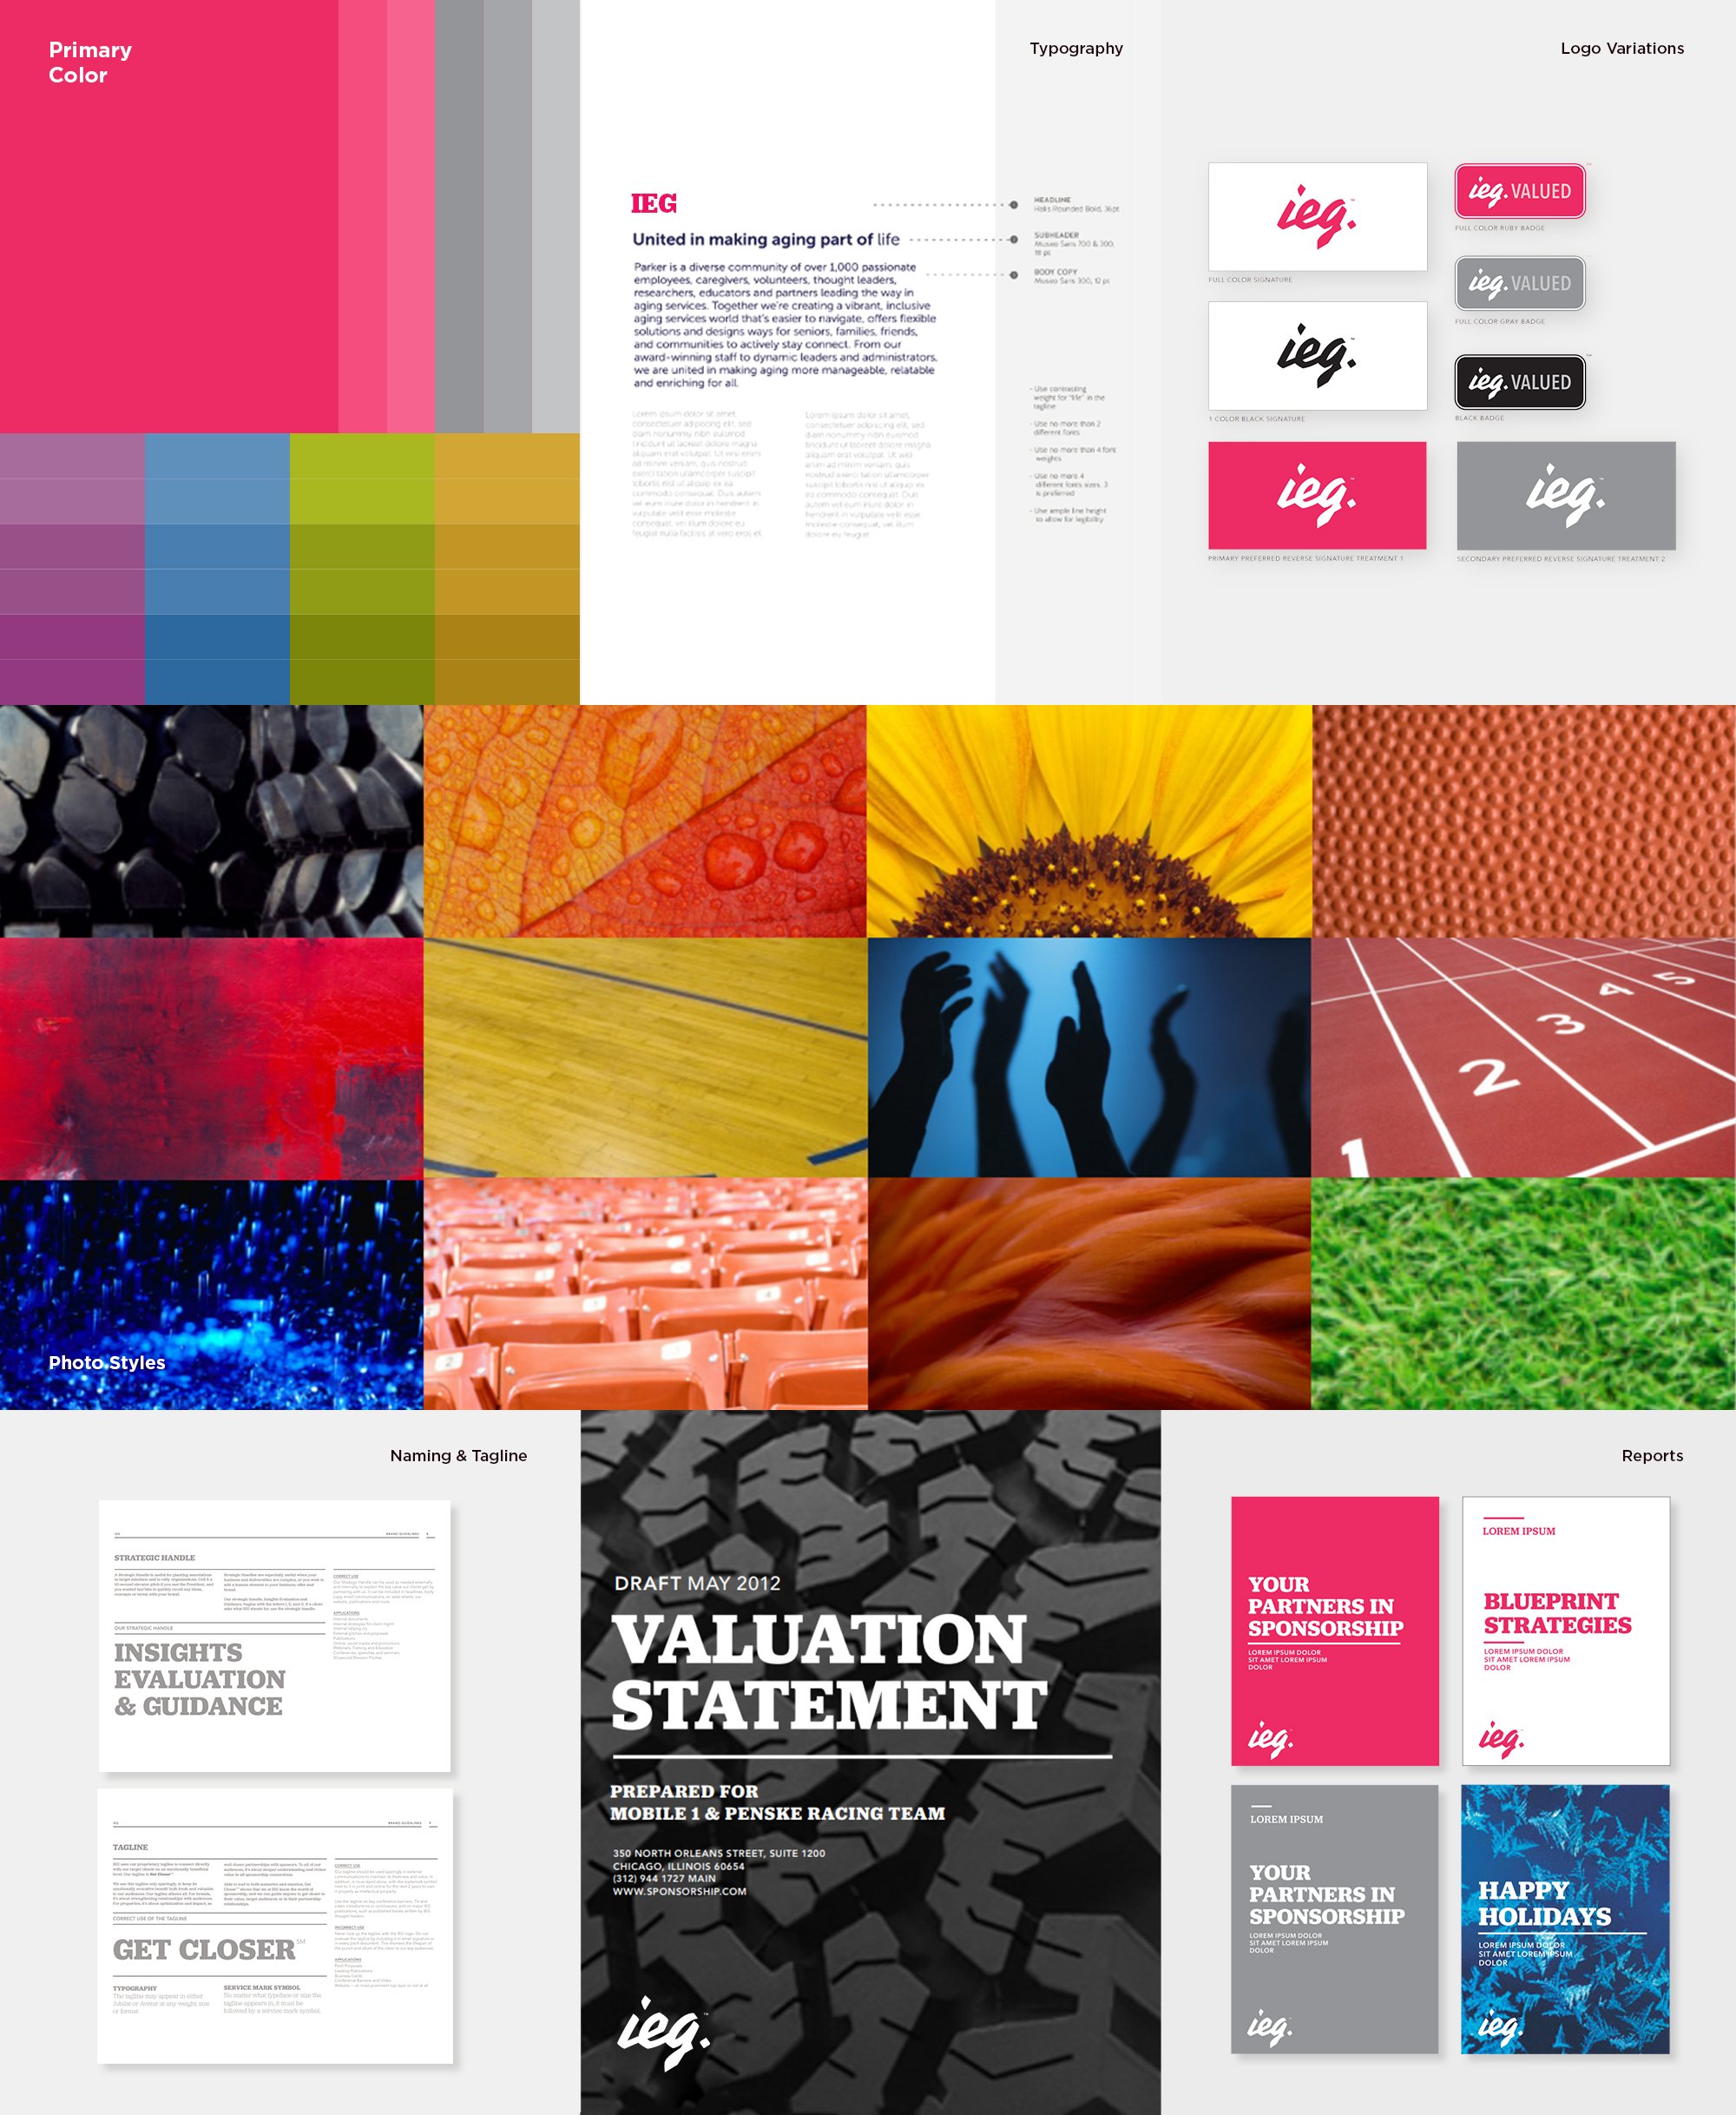 IEG Brand Guidelines